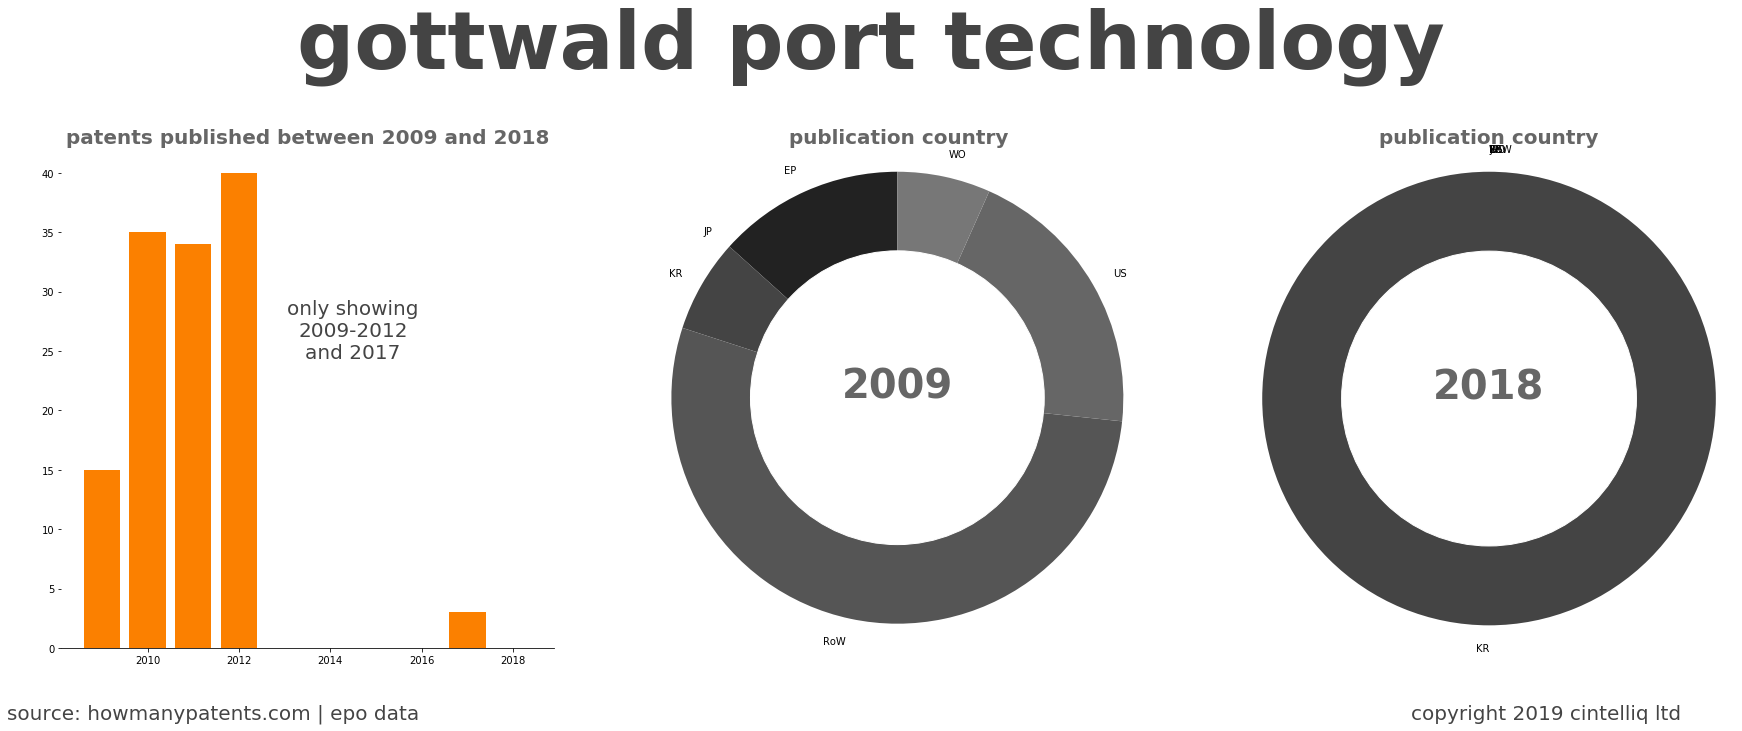 summary of patents for Gottwald Port Technology